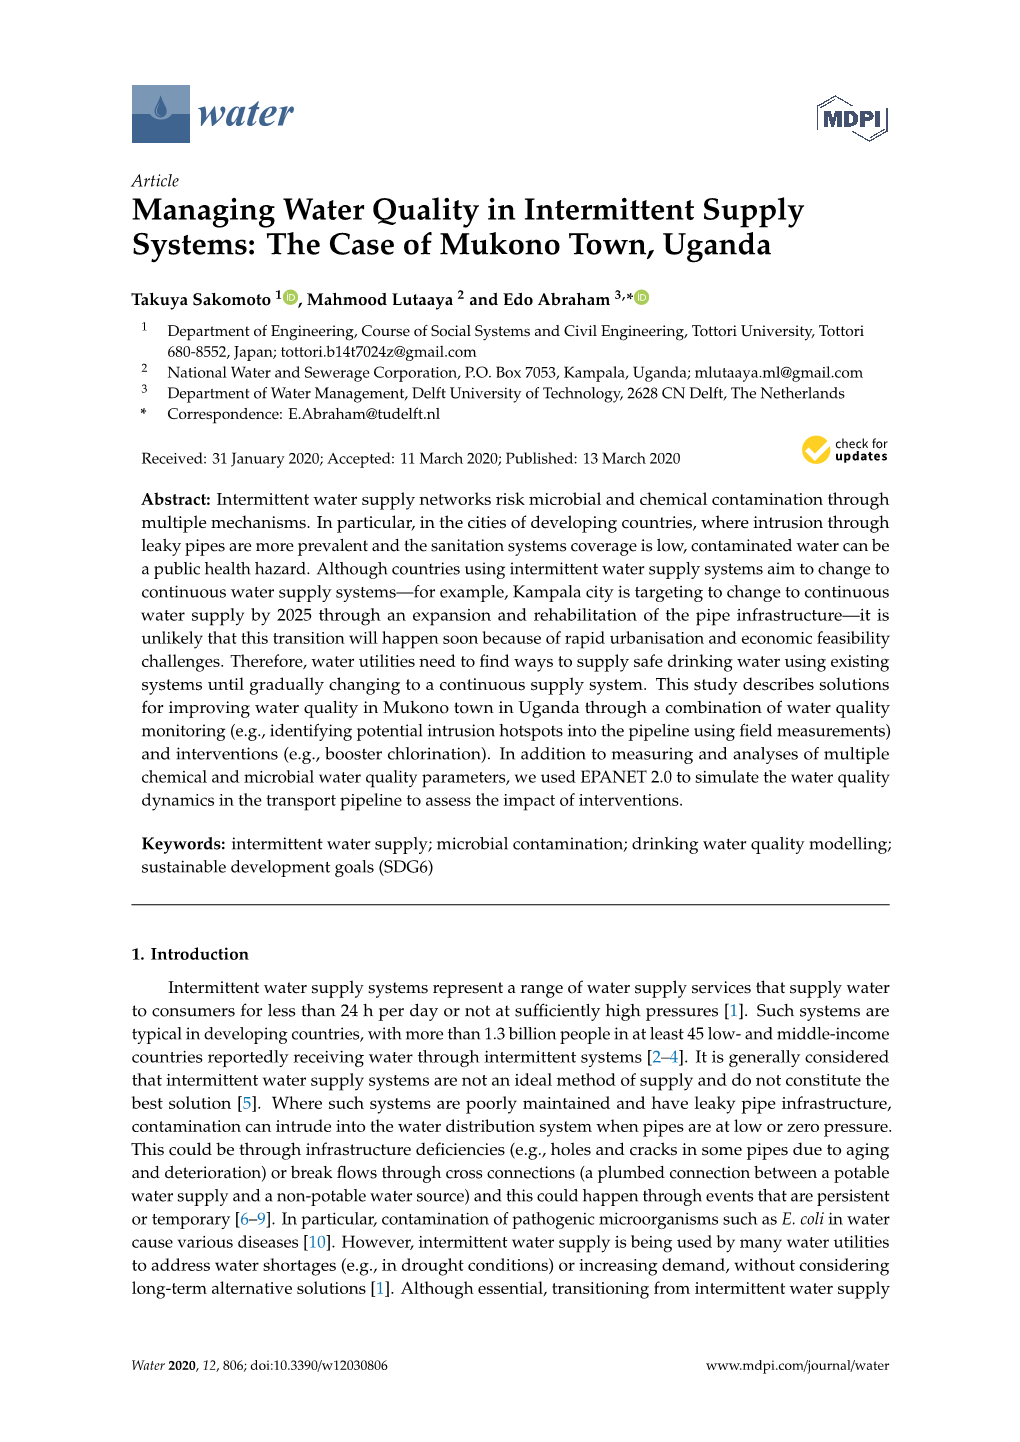 Managing Water Quality in Intermittent Supply Systems: the Case of Mukono Town, Uganda